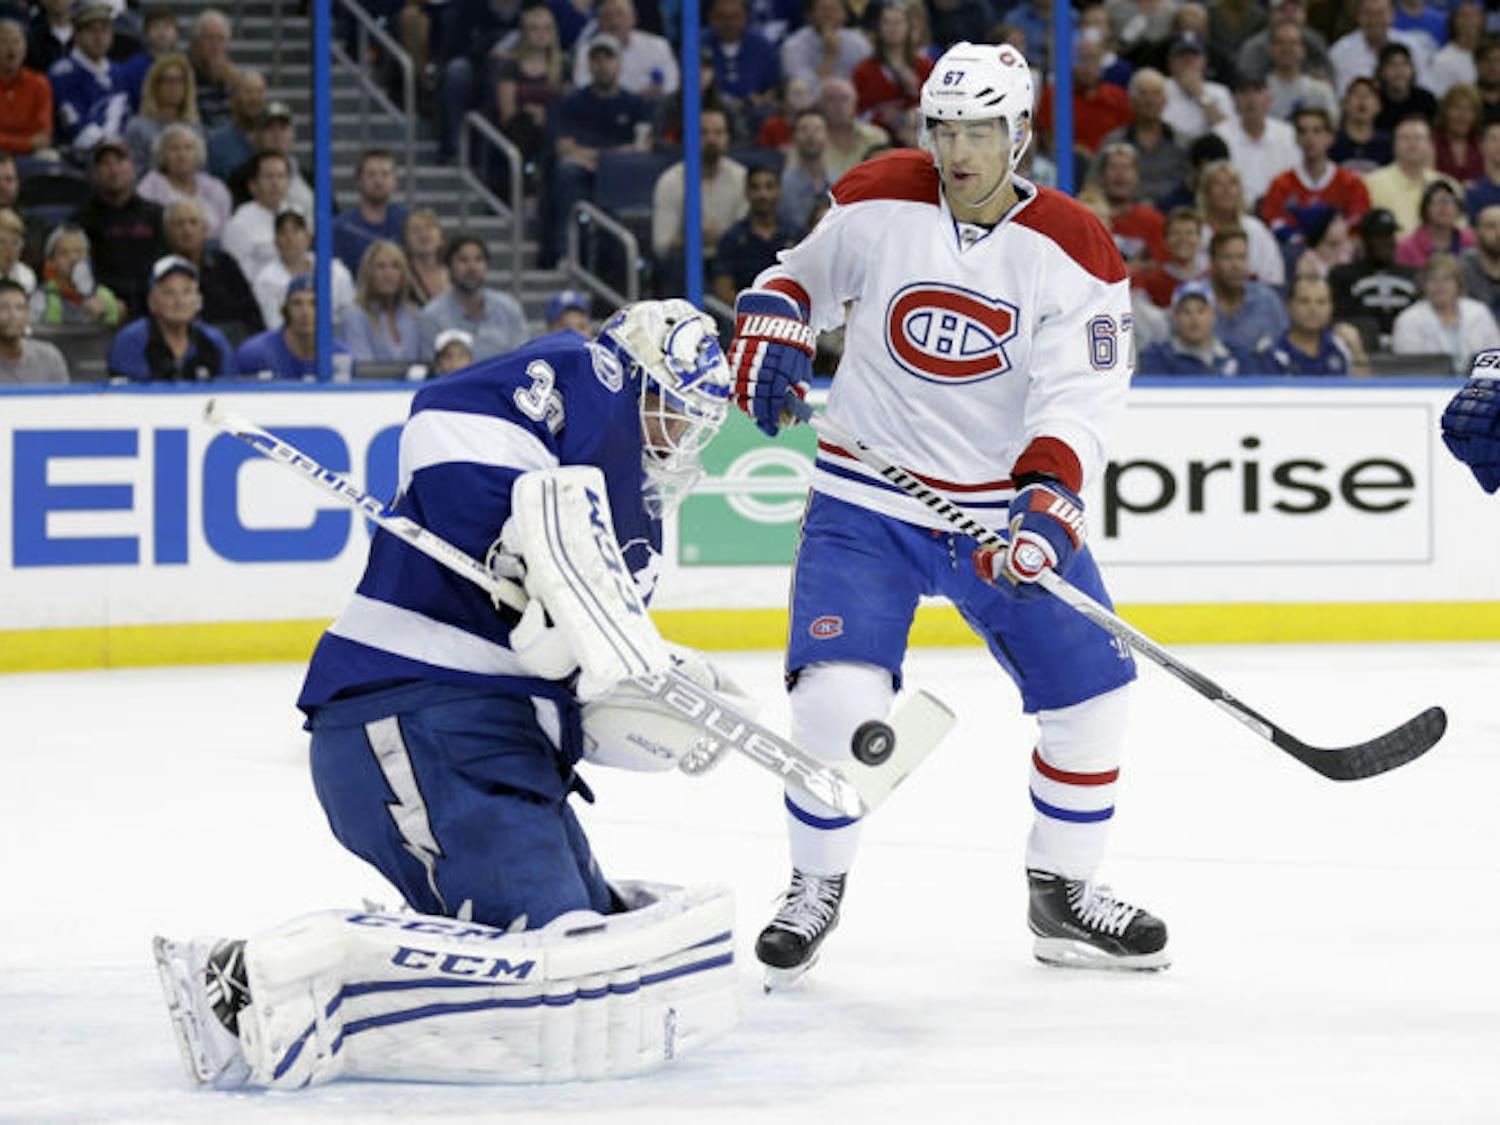 Tampa Bay goalie Anders Lindback (39) makes a save as Montreal winger Max Pacioretty (67) looks for a rebound during Game 1 of their first-round playoff series in Tampa.